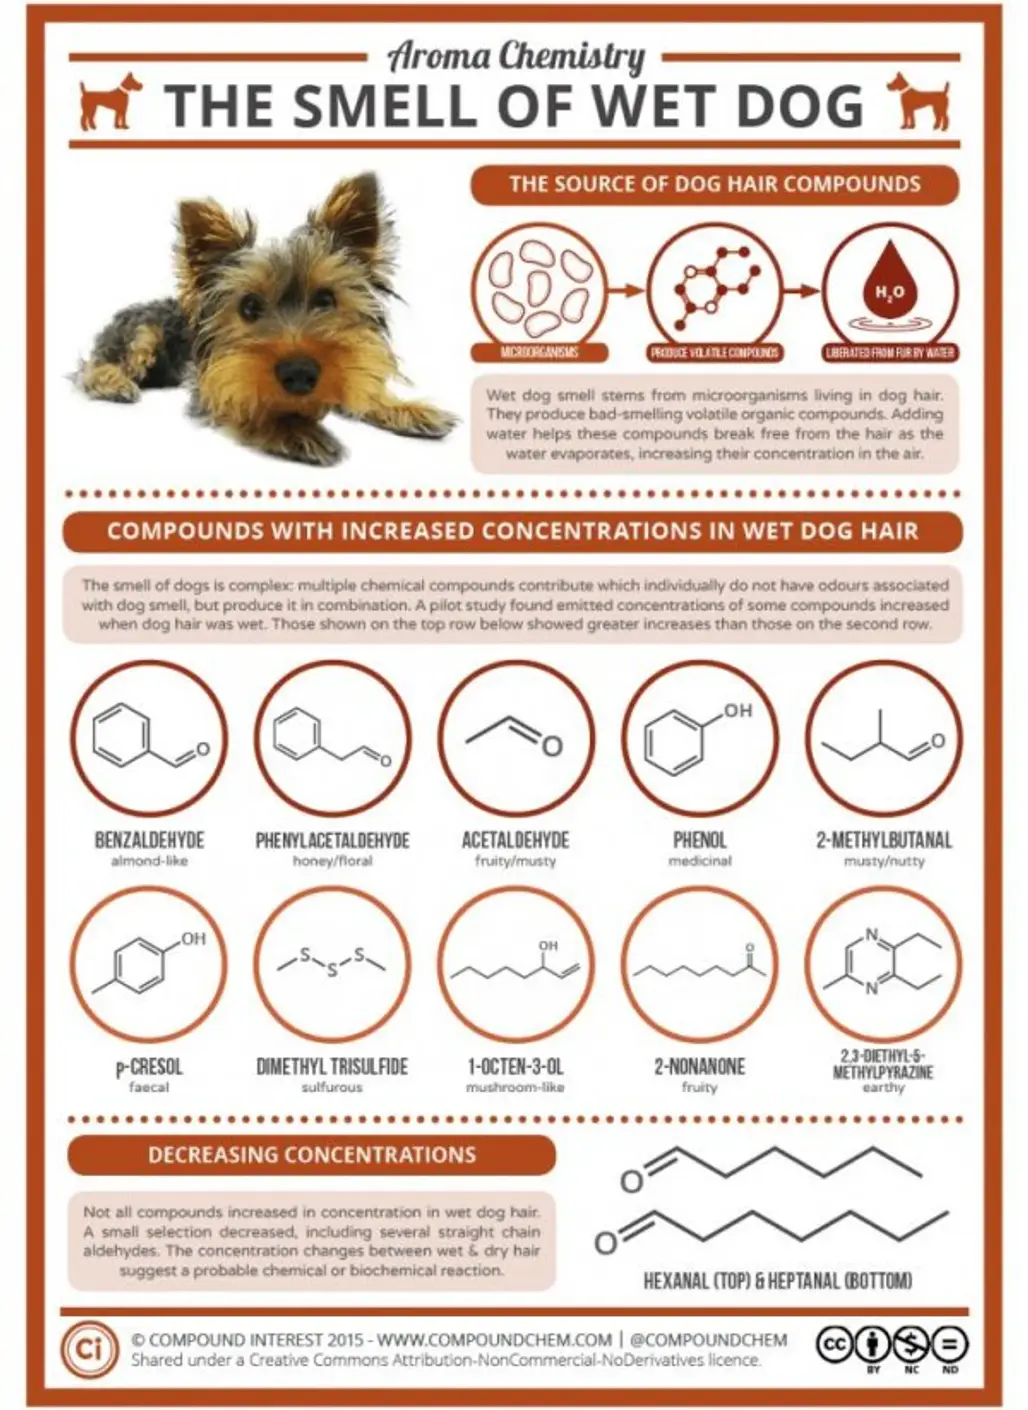 The Chemistry behind the Smell of Wet Dogs